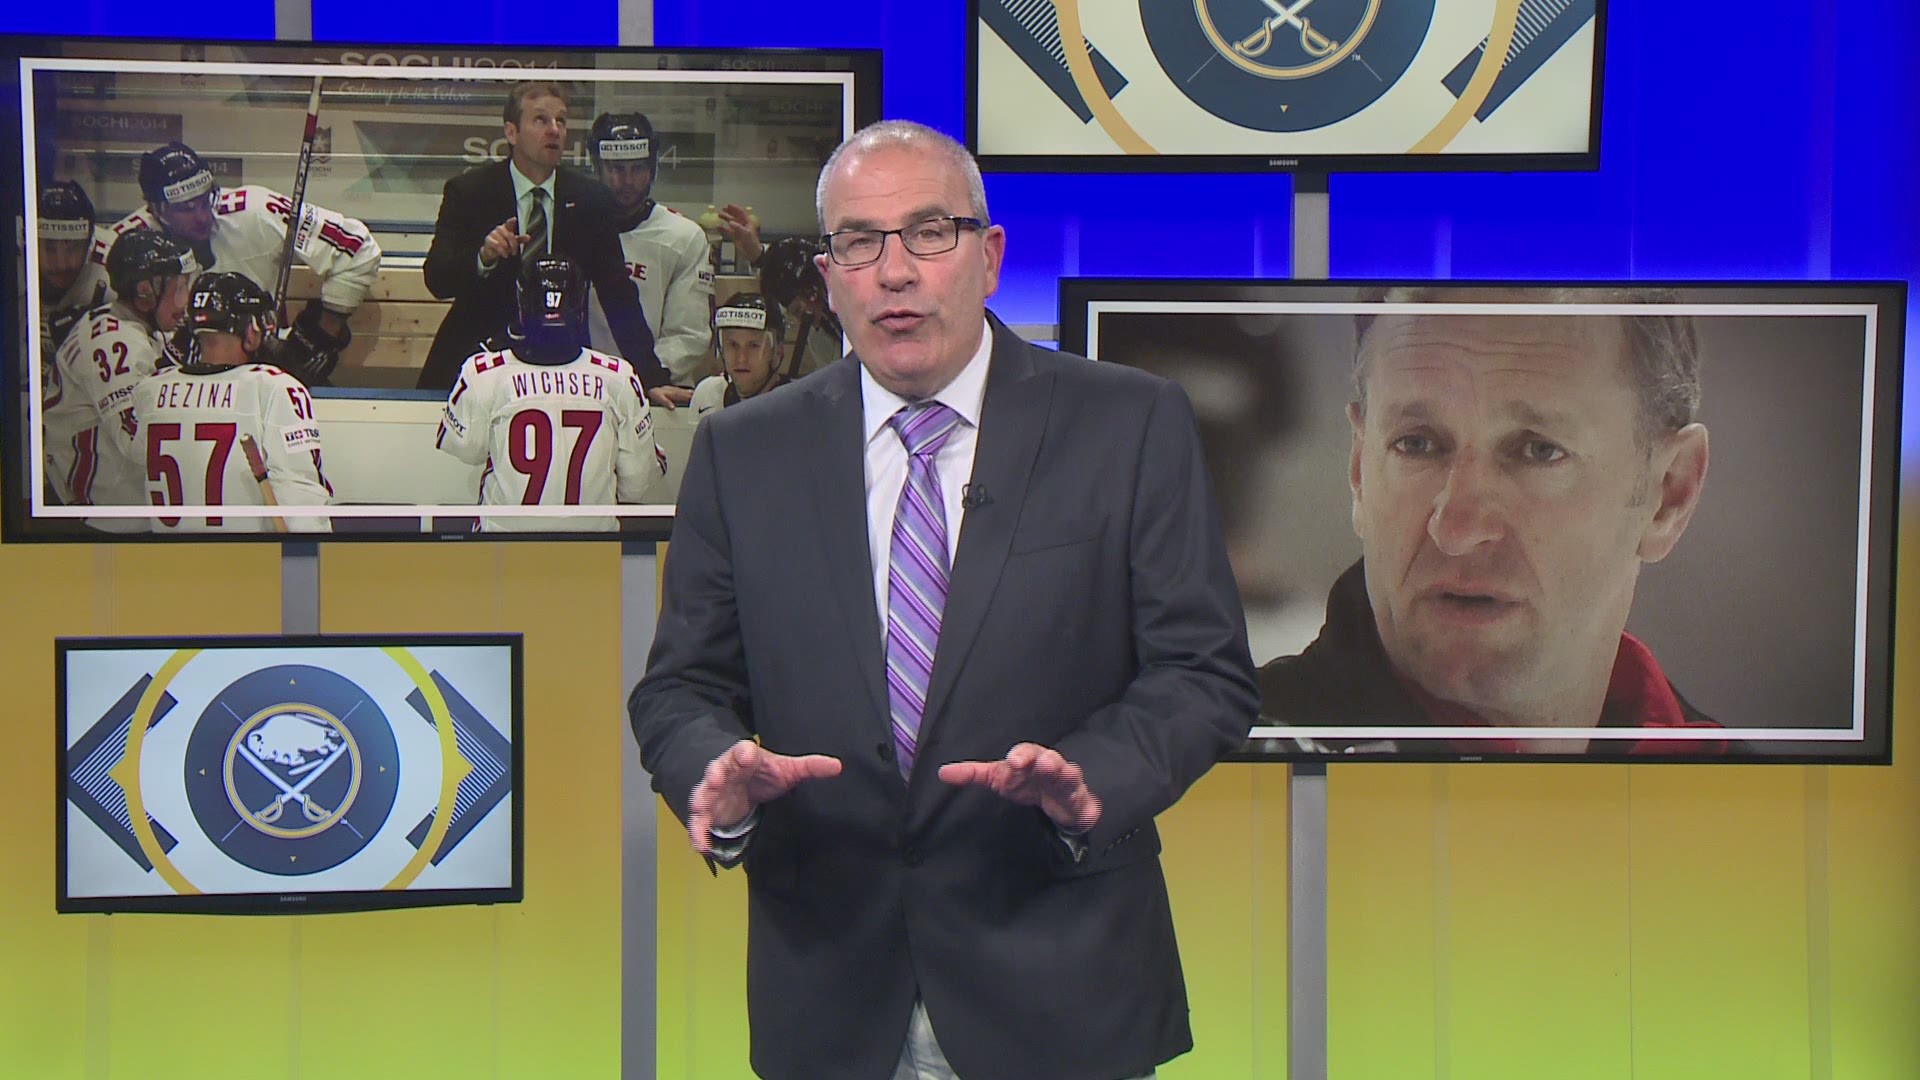 Stu Boyar shares his thoughts on the Sabres reported hiring of Ralph Krueger as head coach.